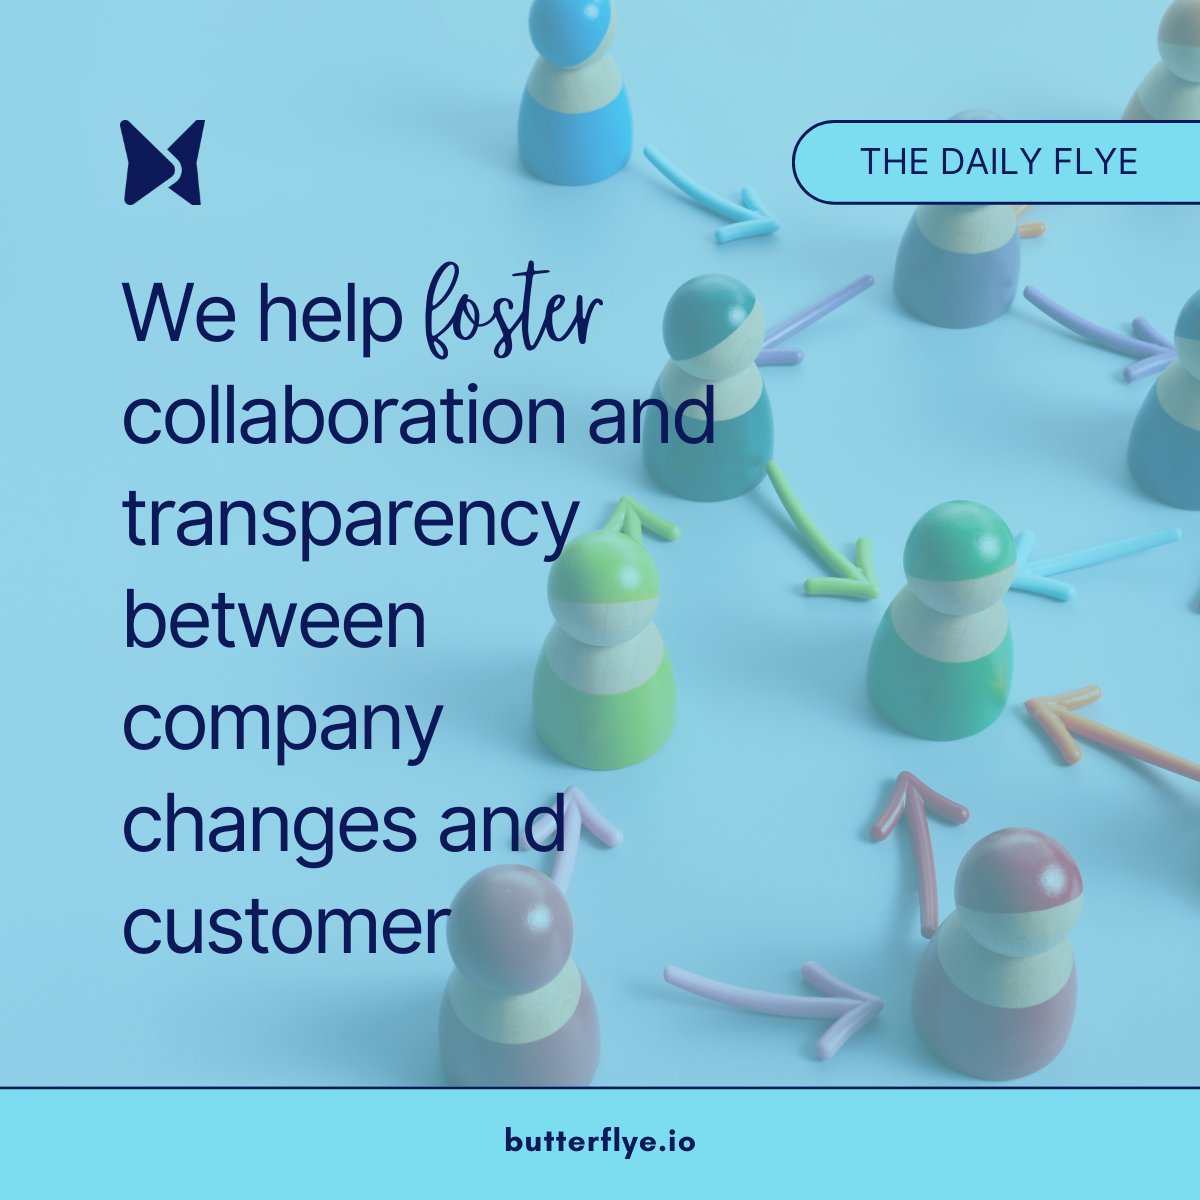 Build customer loyalty and trust.

Check out our lifetime deal at AppSumo>> appsumo.8odi.net/PyBLYR

Or Learn even more at butterflye.io

#productannouncement #appsumo #butterflyesolutions #customerfeedback #roadmap #engagecustomers #productmanager #changelog